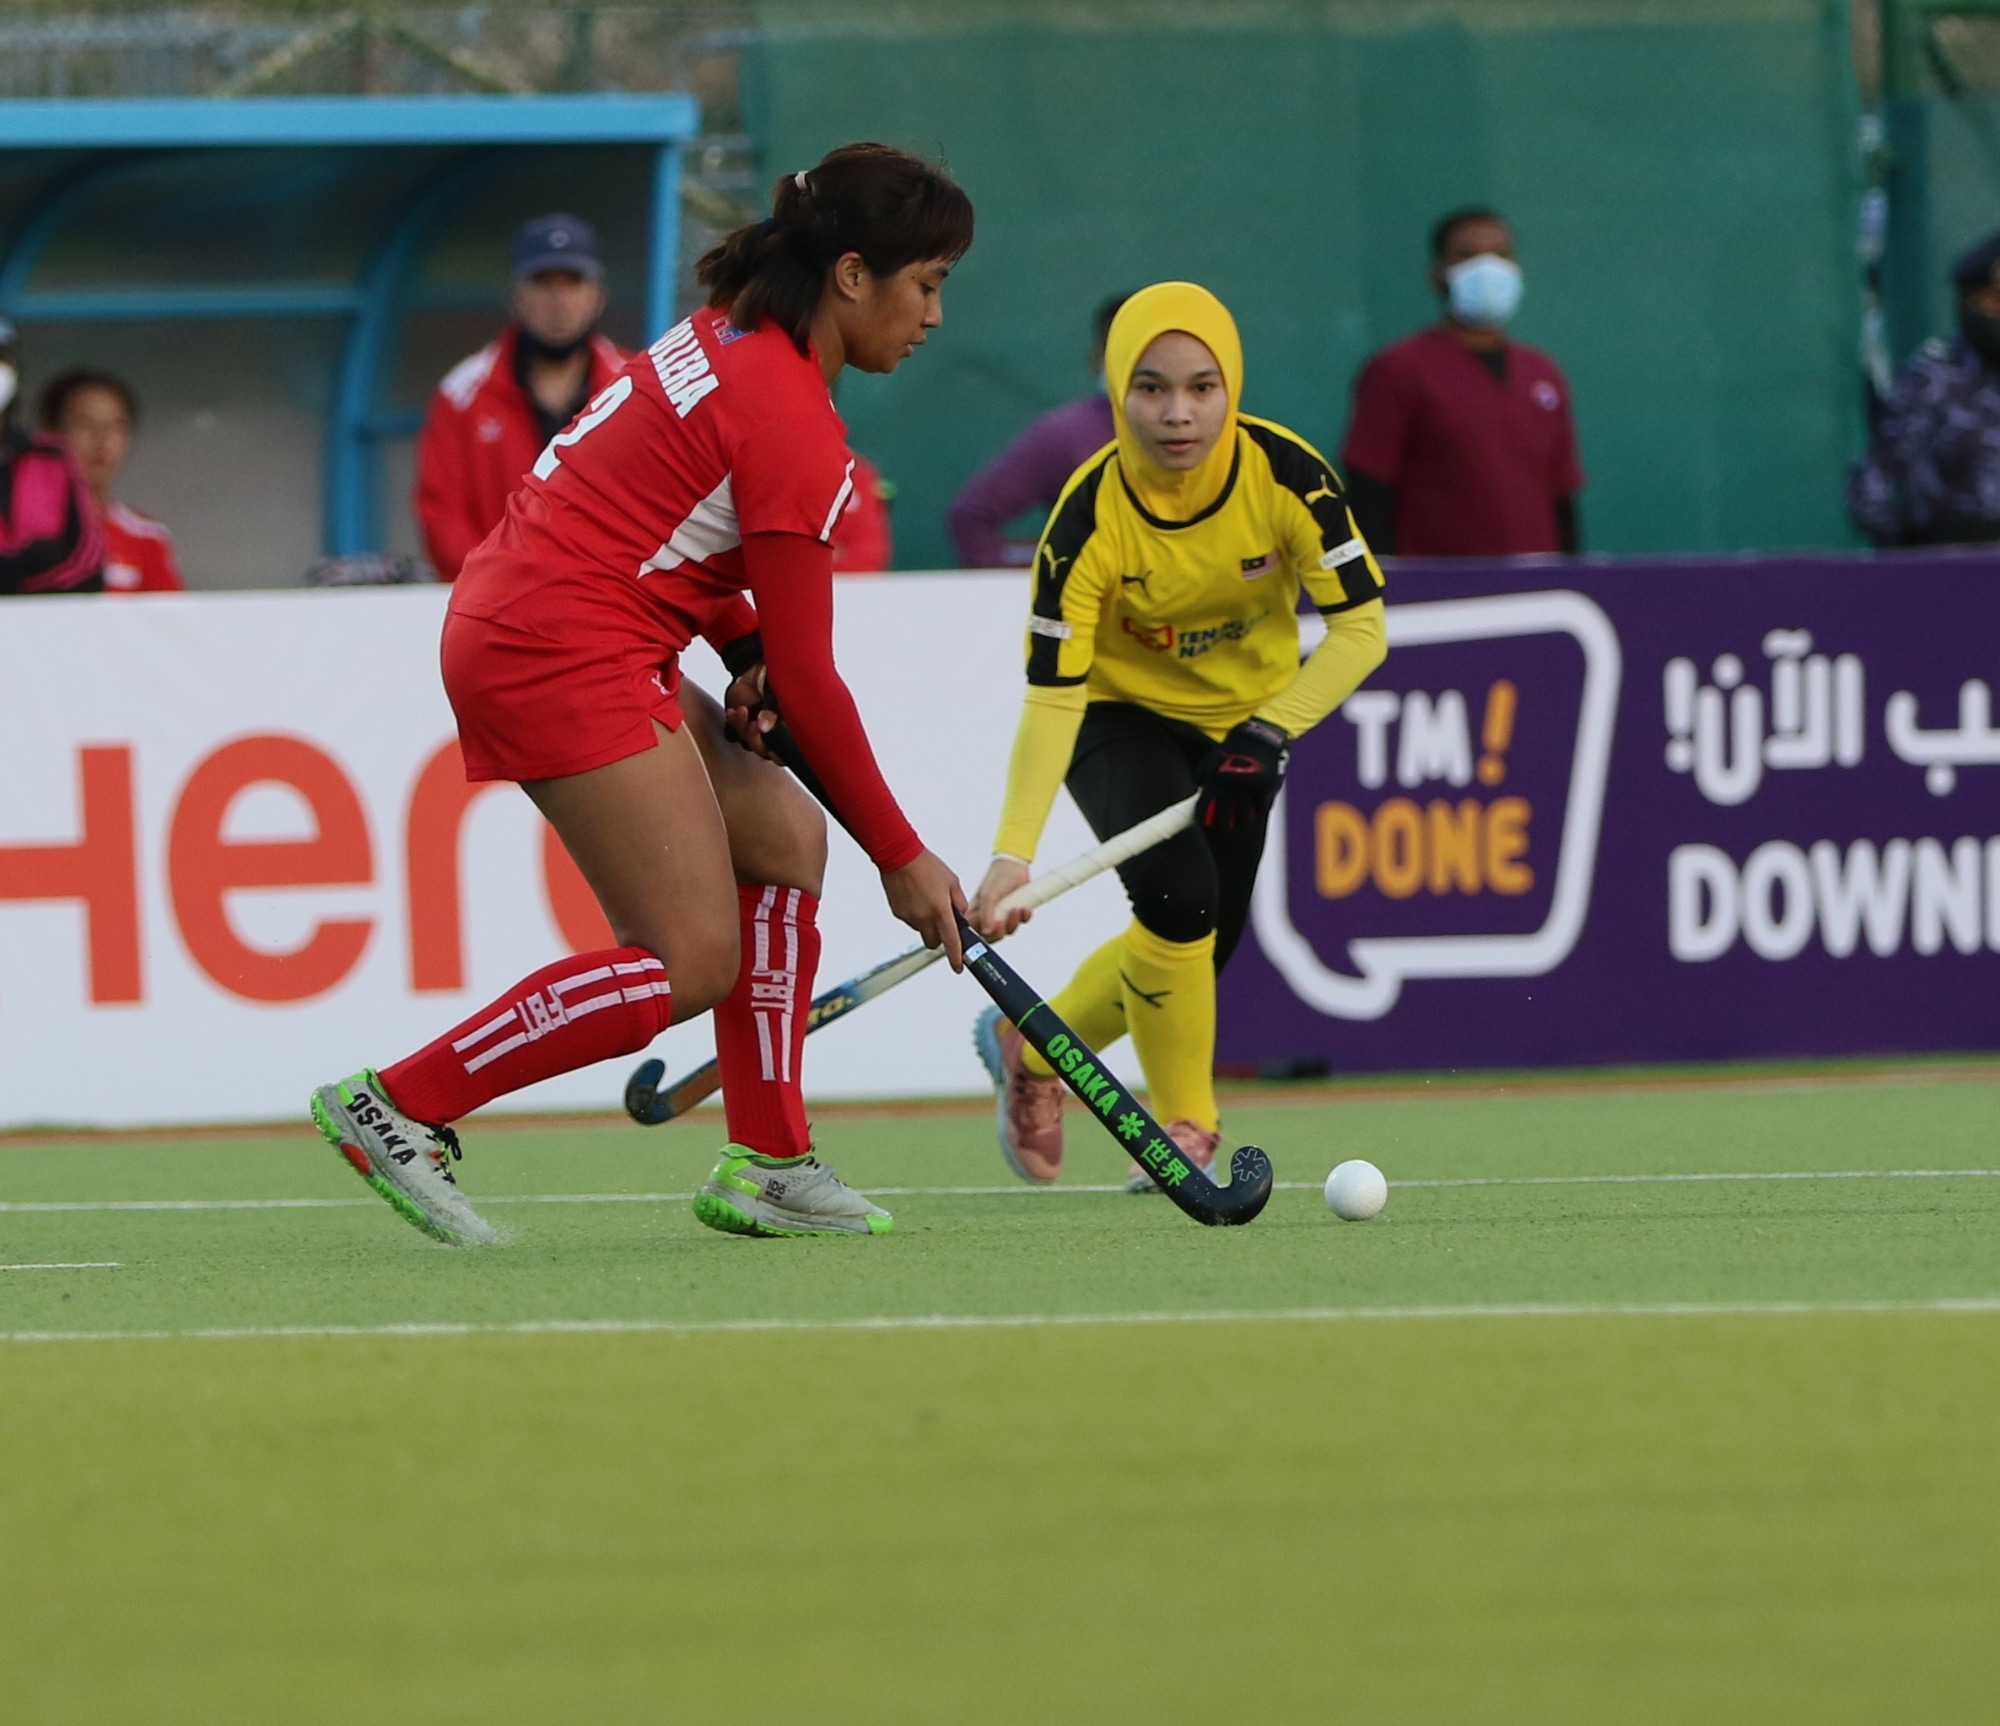 Muscat is also due to host the first FIH Hockey5s World Cup for men and women in January ©AHF